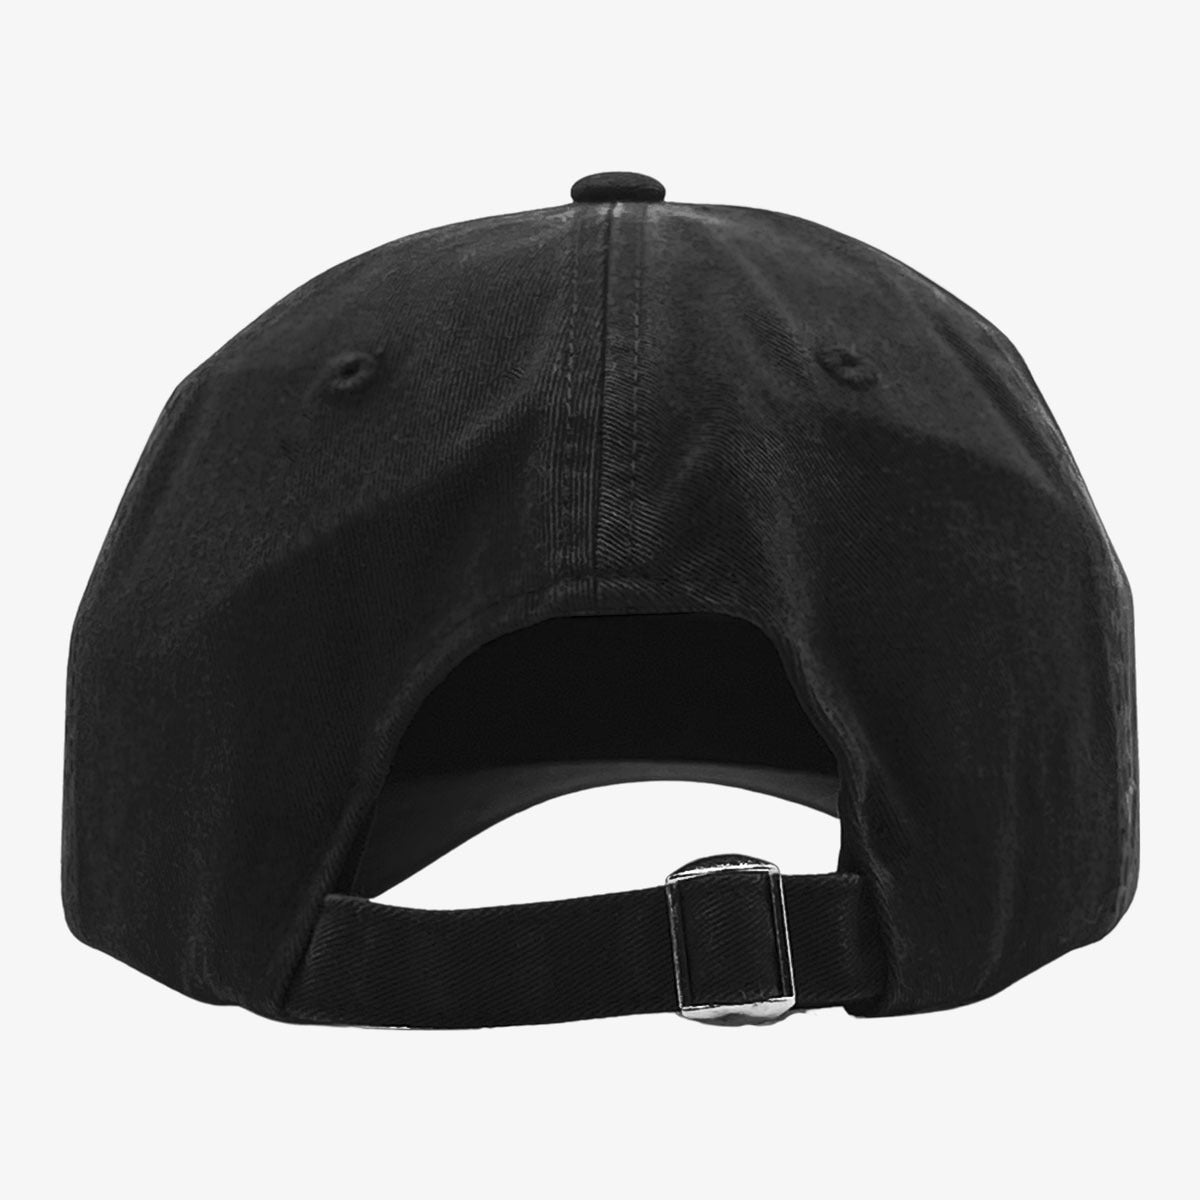 The back side of a black dad cap with an adjustable strap back closure.